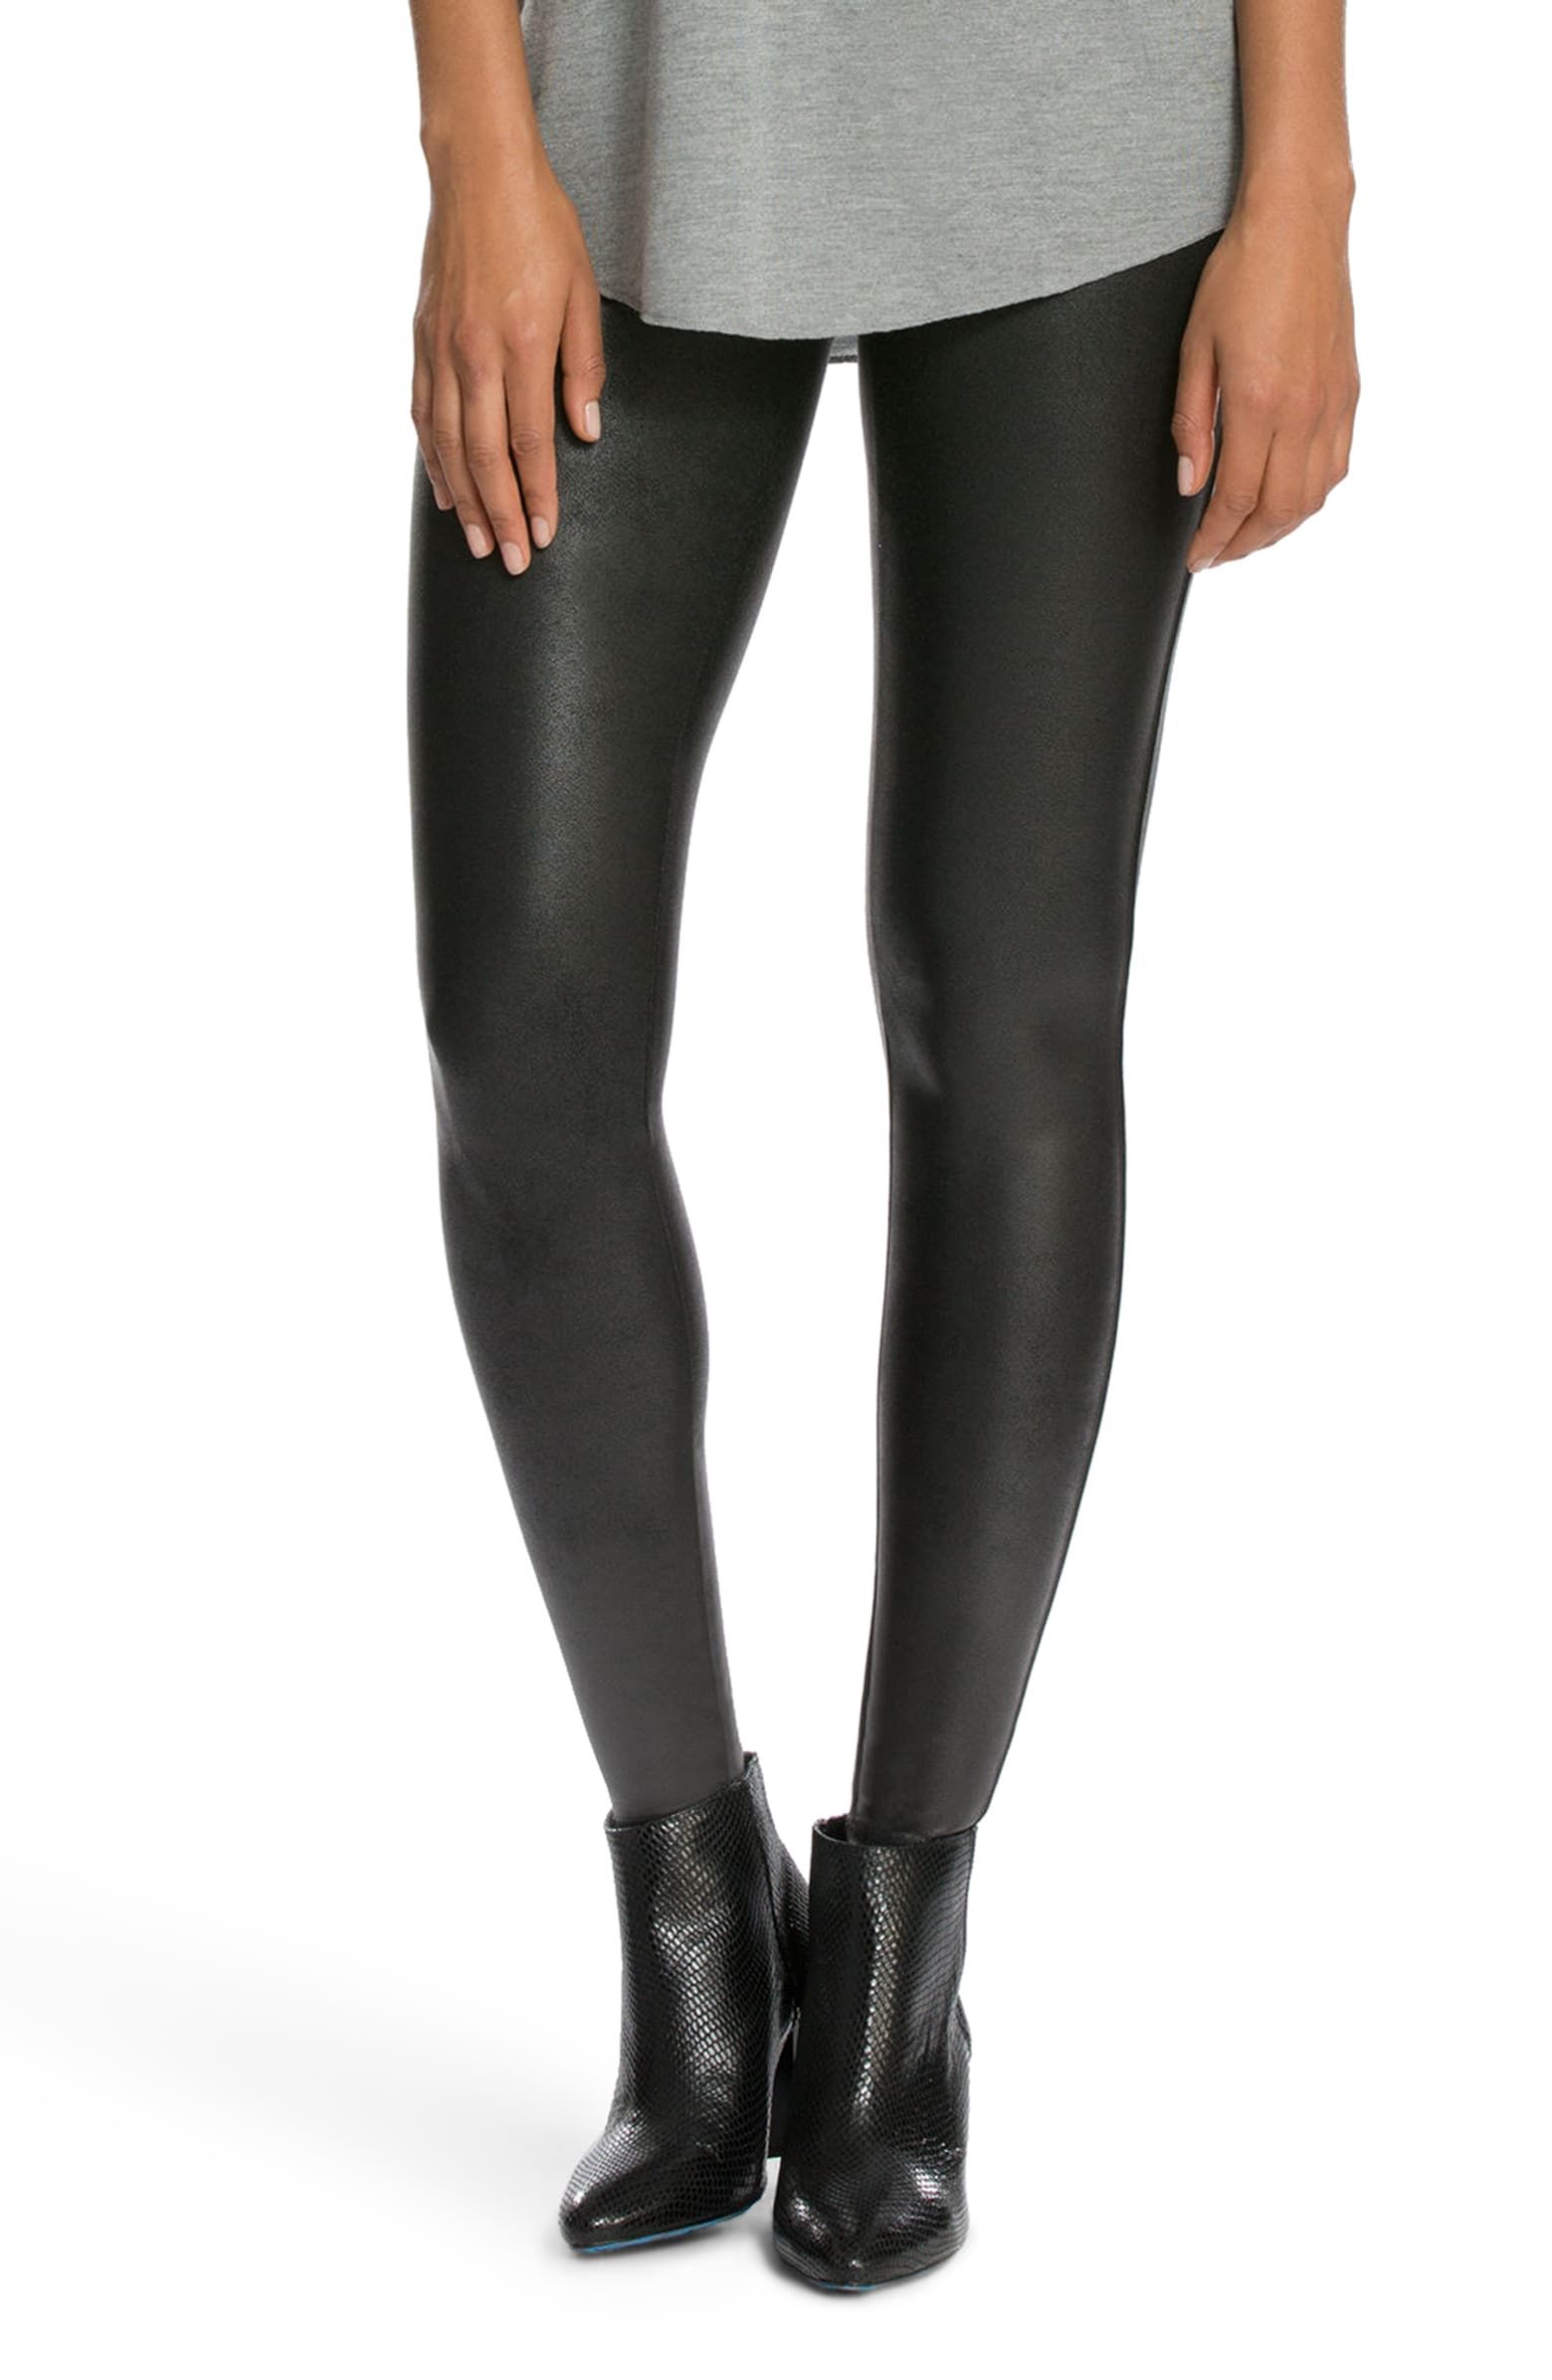 These Faux Leather Leggings Are Actually Yoga Pants